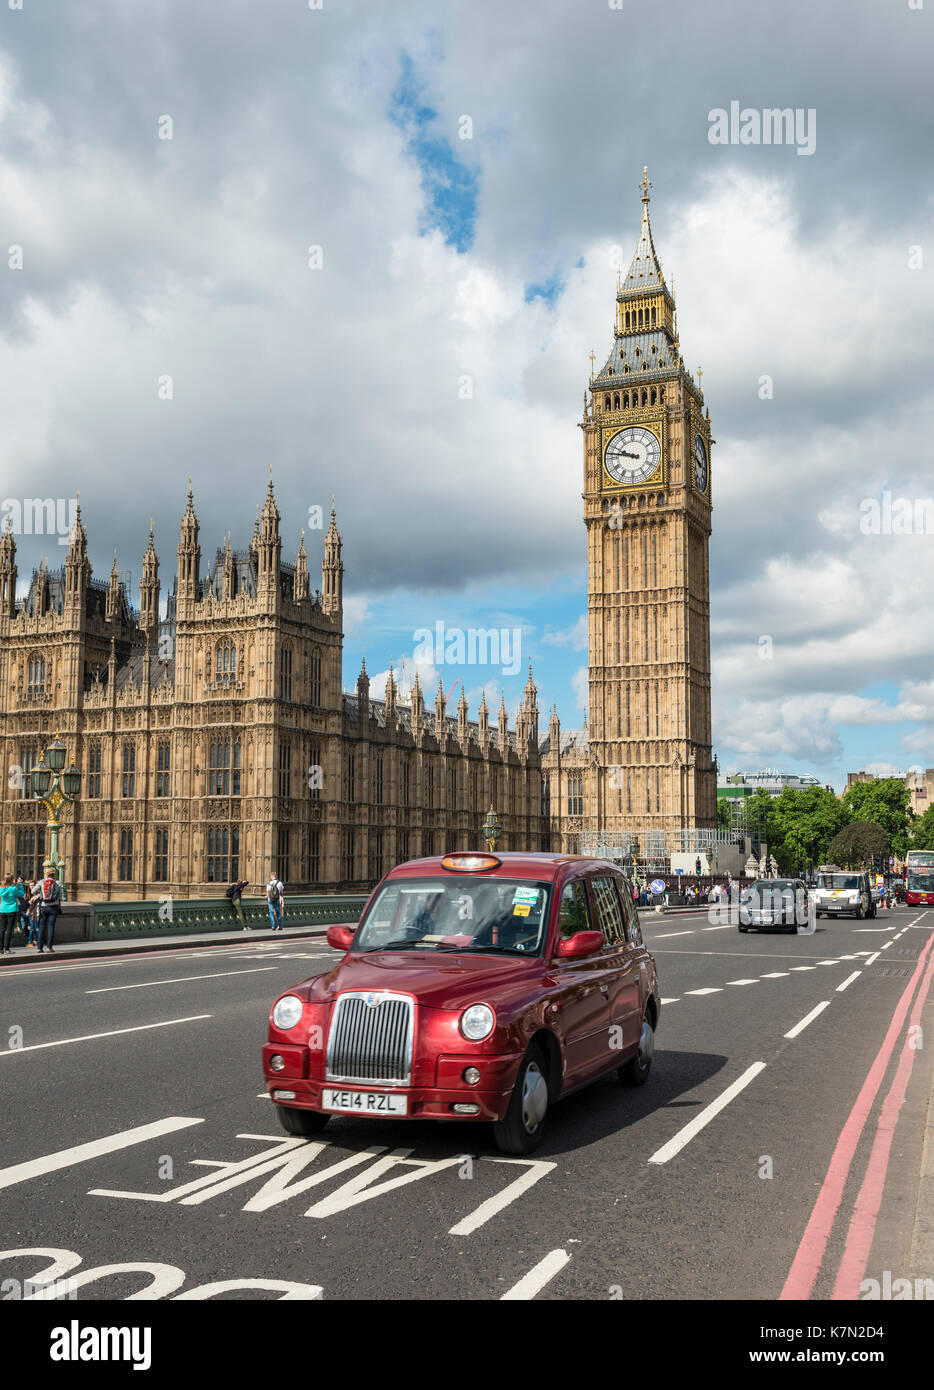 Red Taxi on the Westminster Bridge, Westminster Palace and Big Ben, London, England, Great Britain Stock Photo